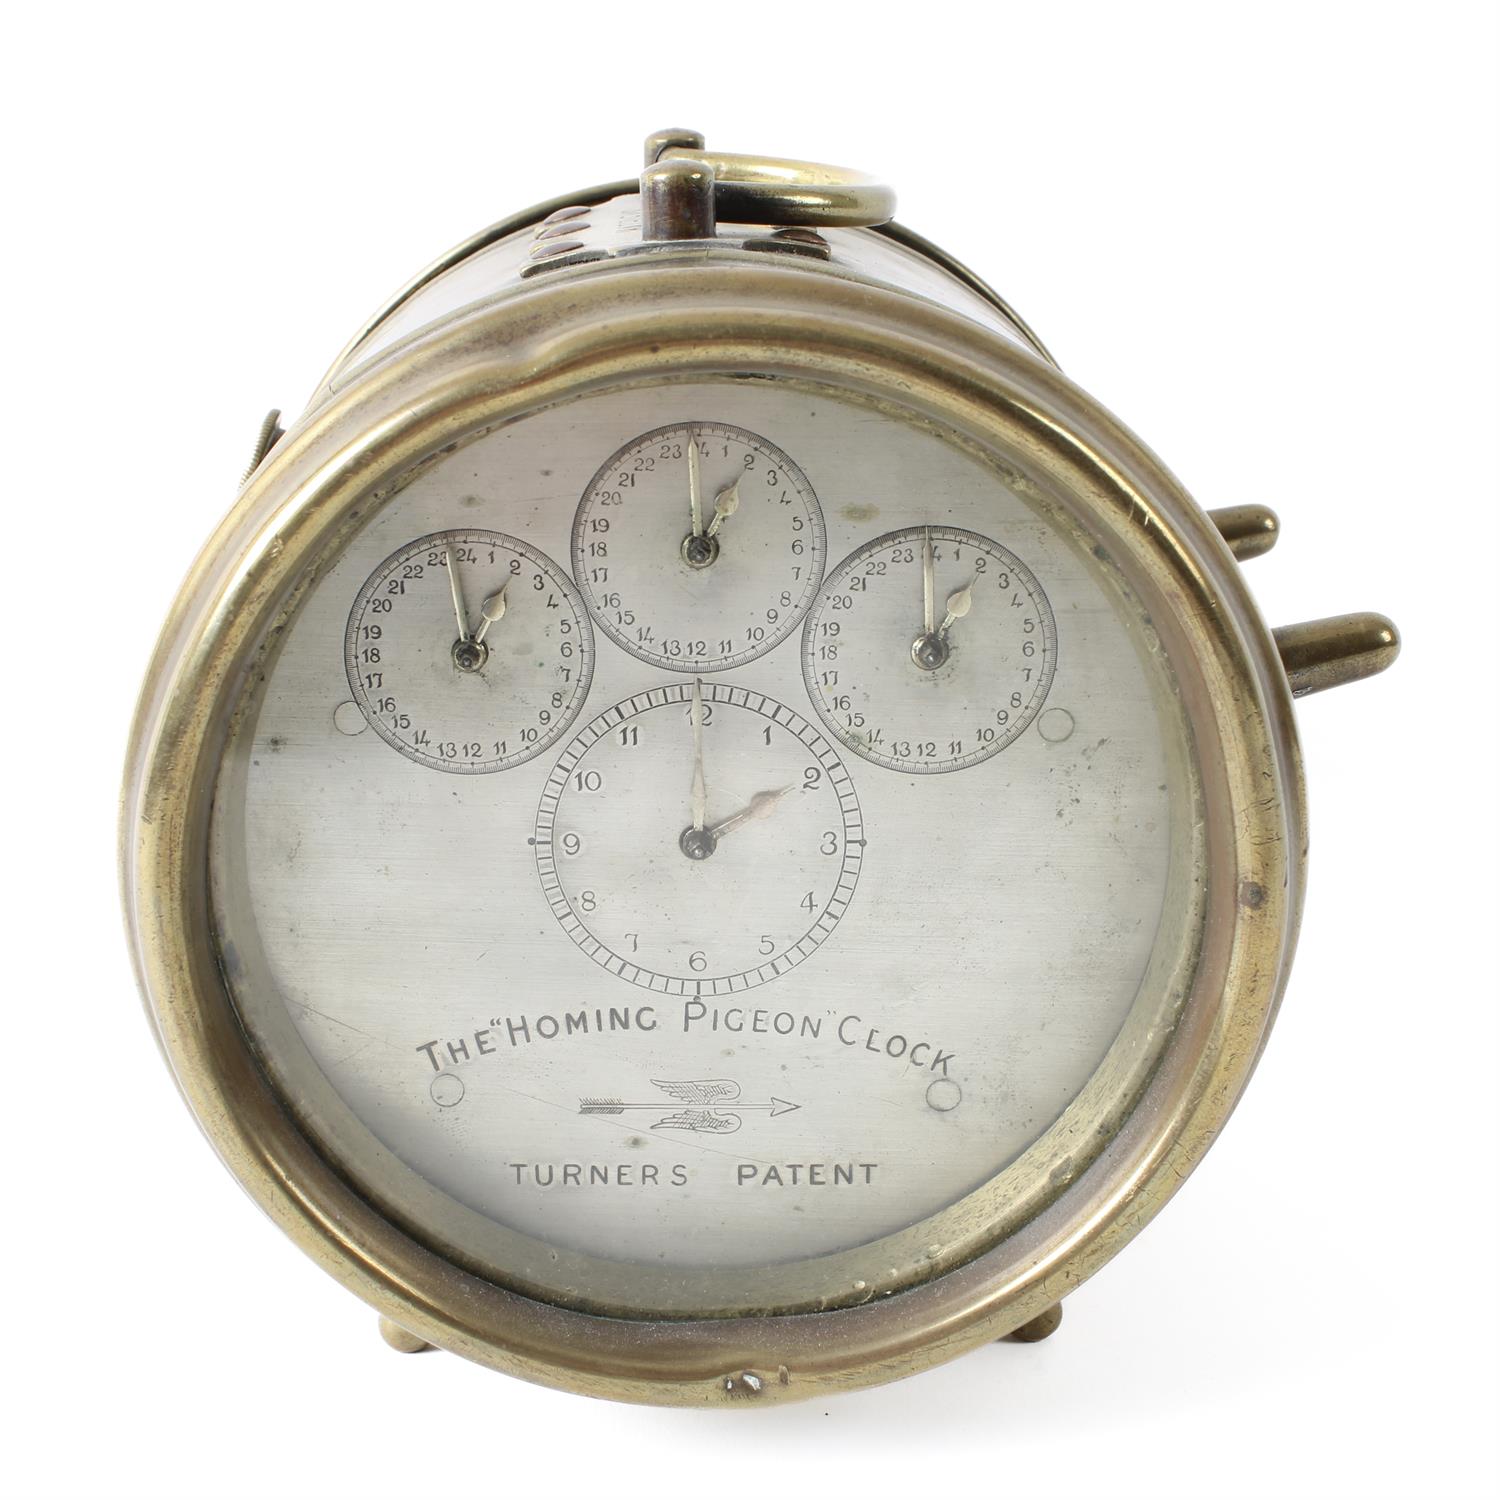 Turner's Patent brass-cased Homing Pigeon clock